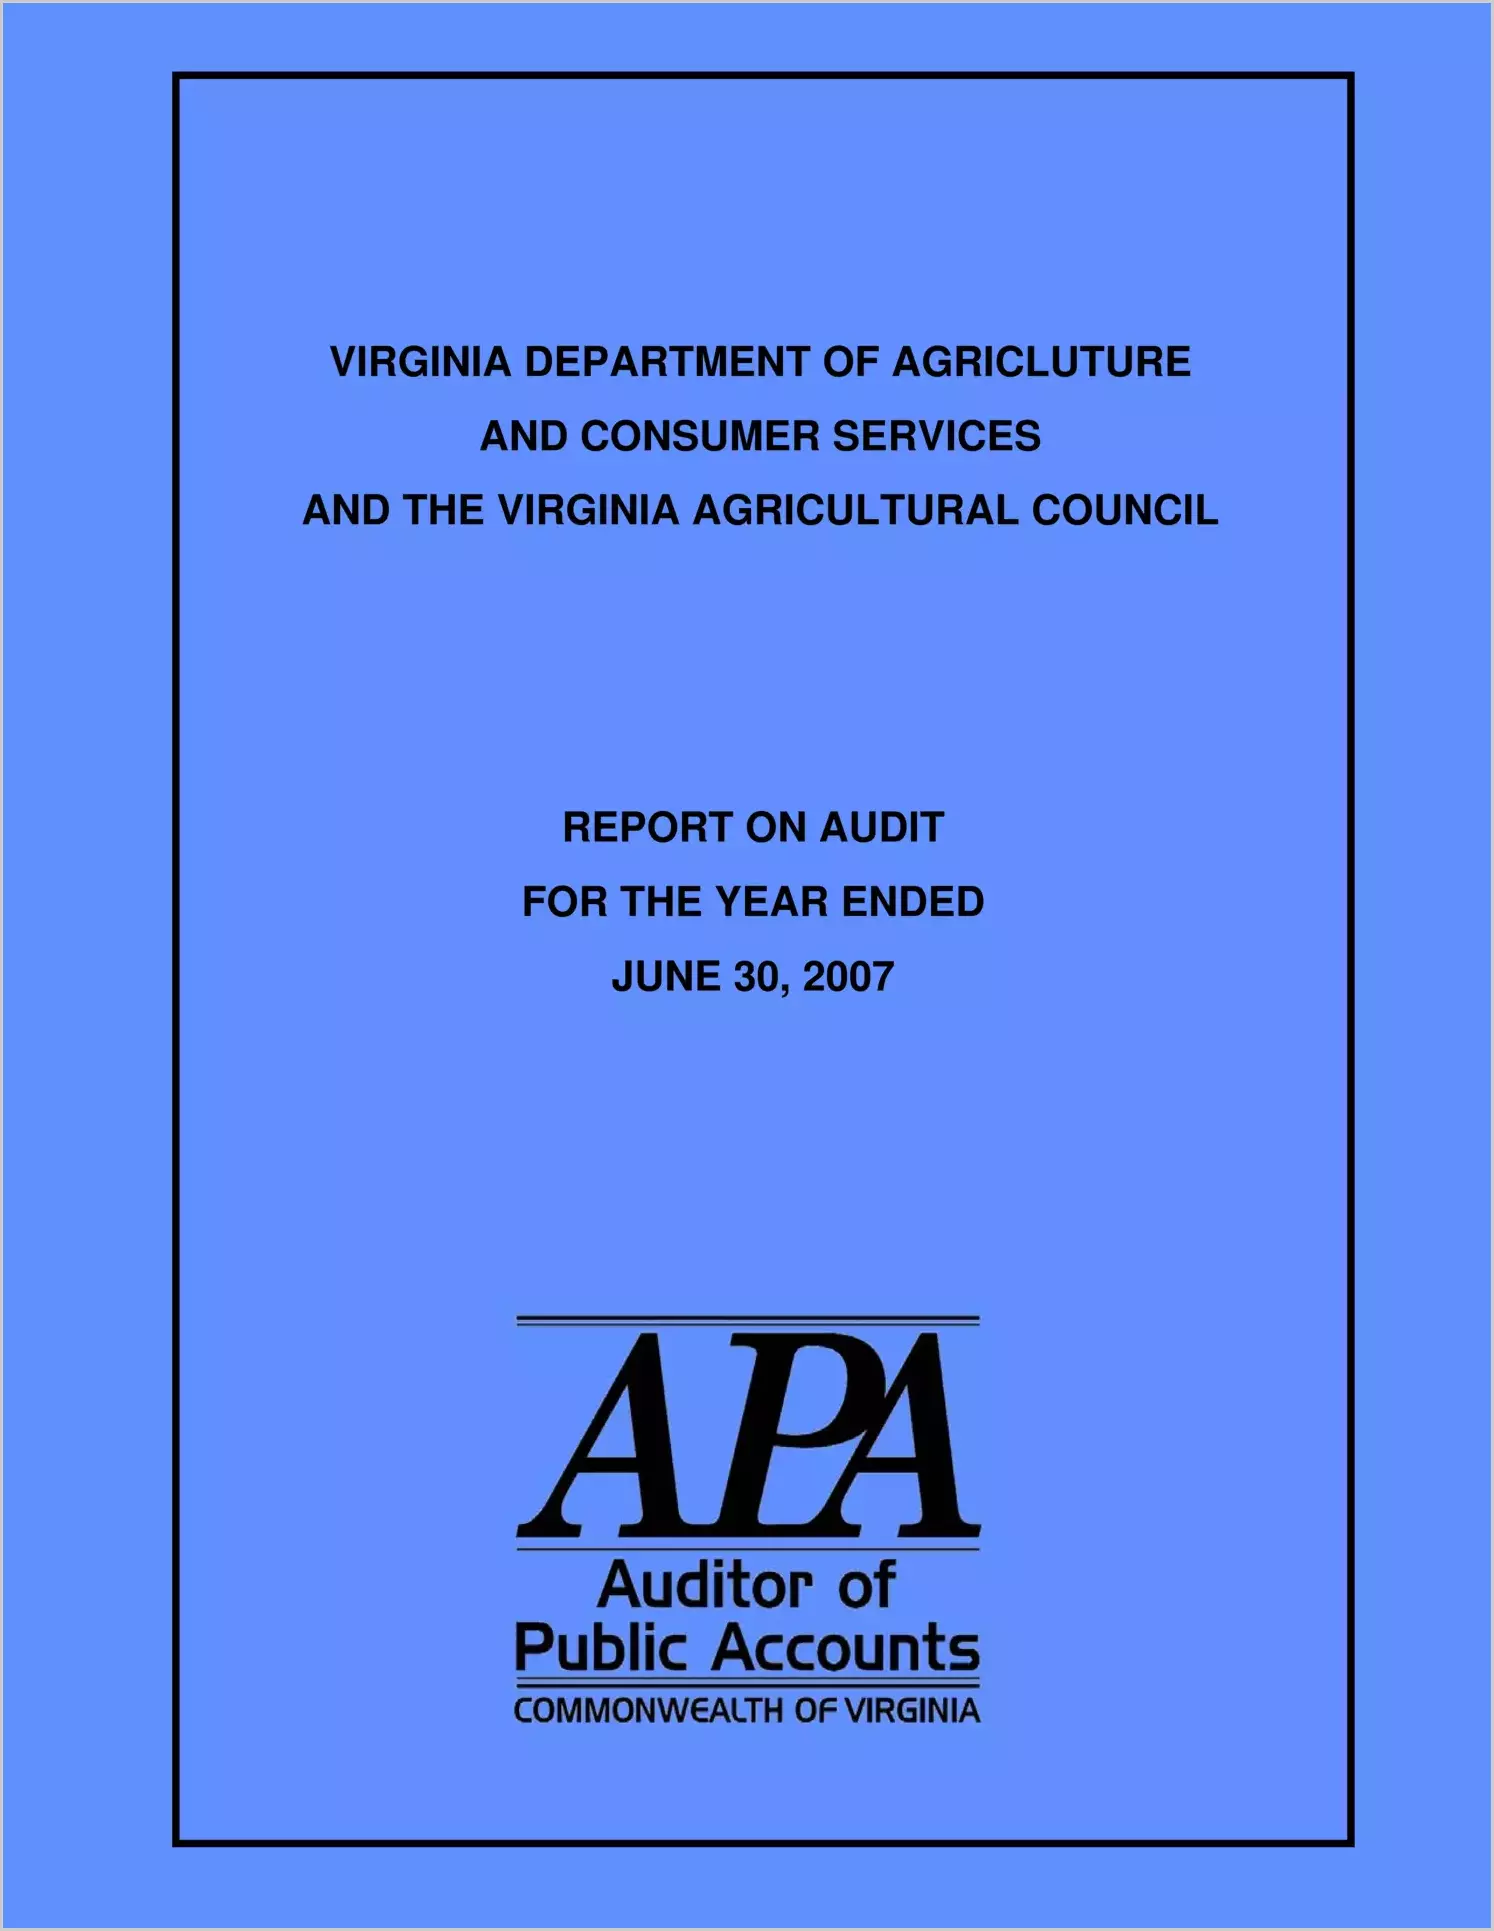 Virginia Department of Agriculture and Consumer Services  and the Virginia Agricultural Council for the year ended June 30, 2007